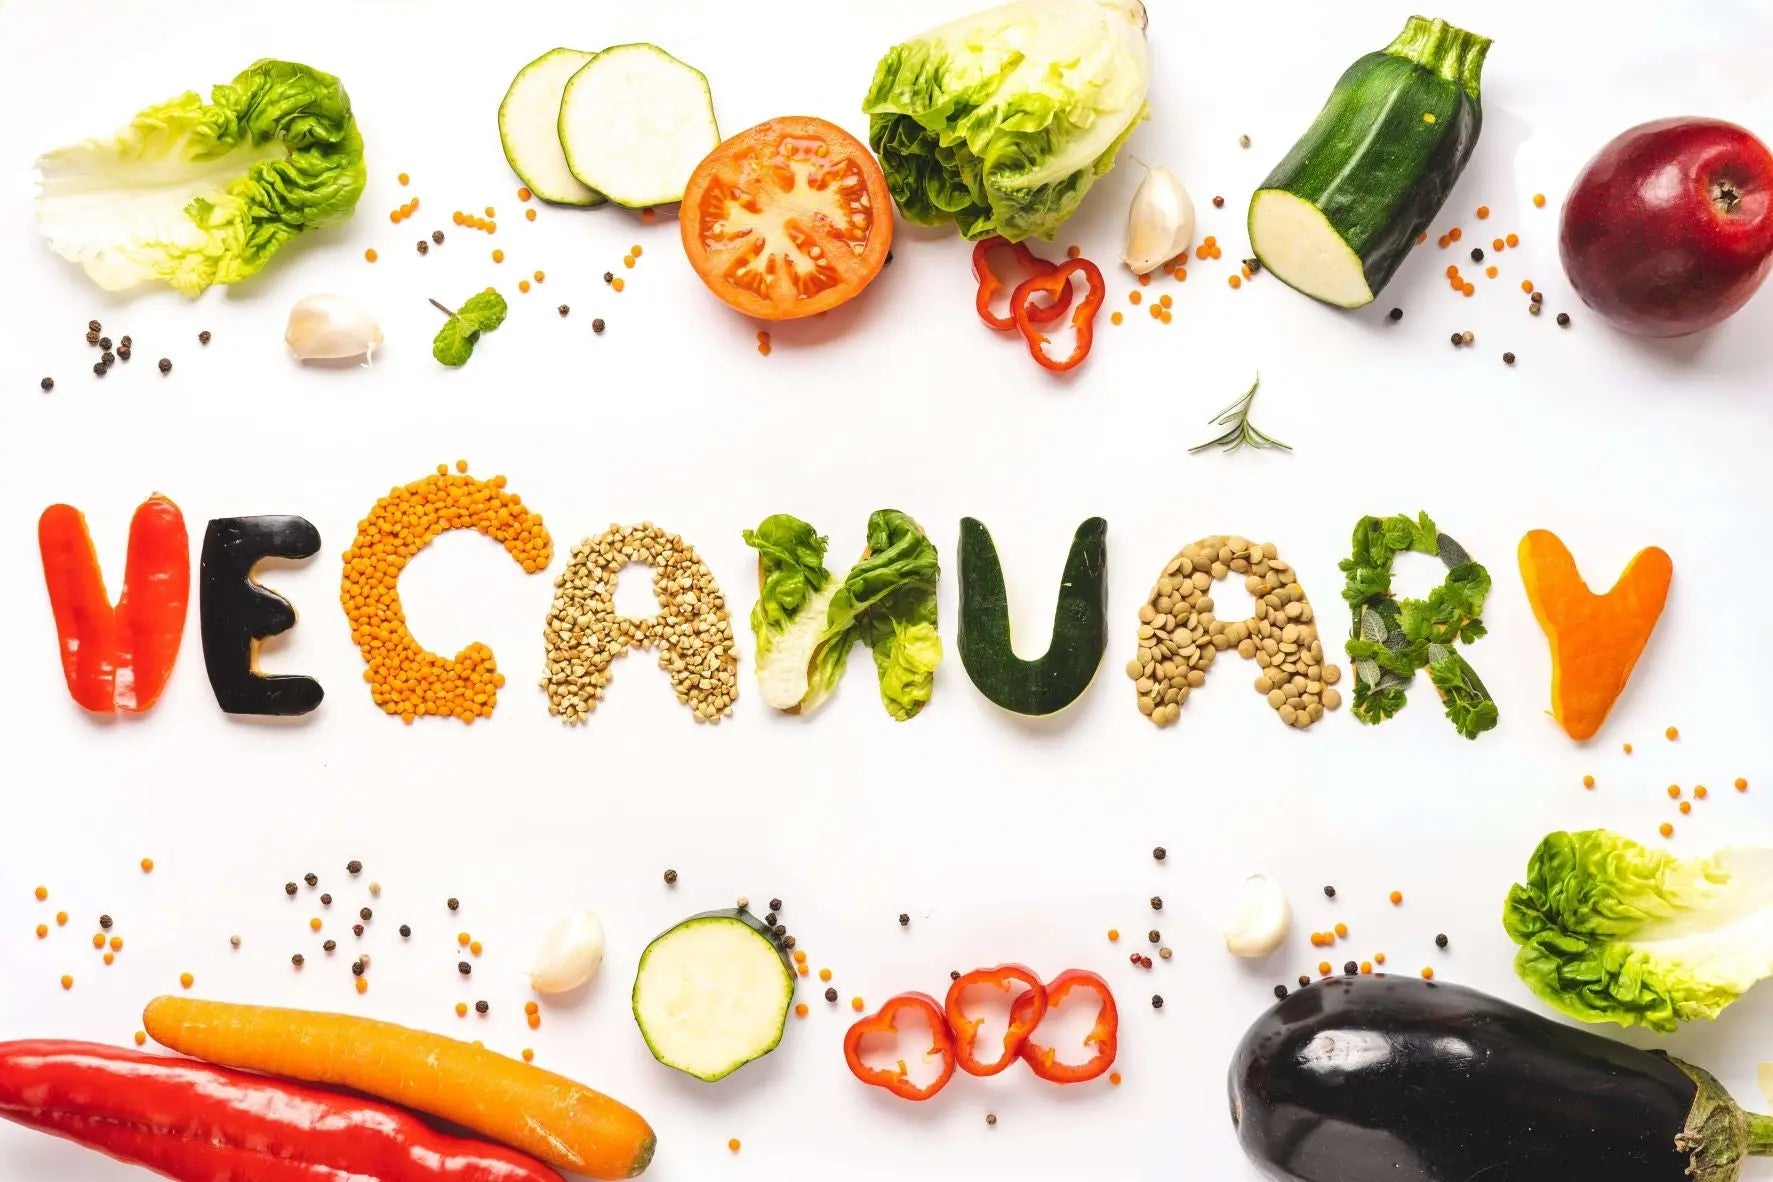 Veganuary  - Beyond what's on our plates